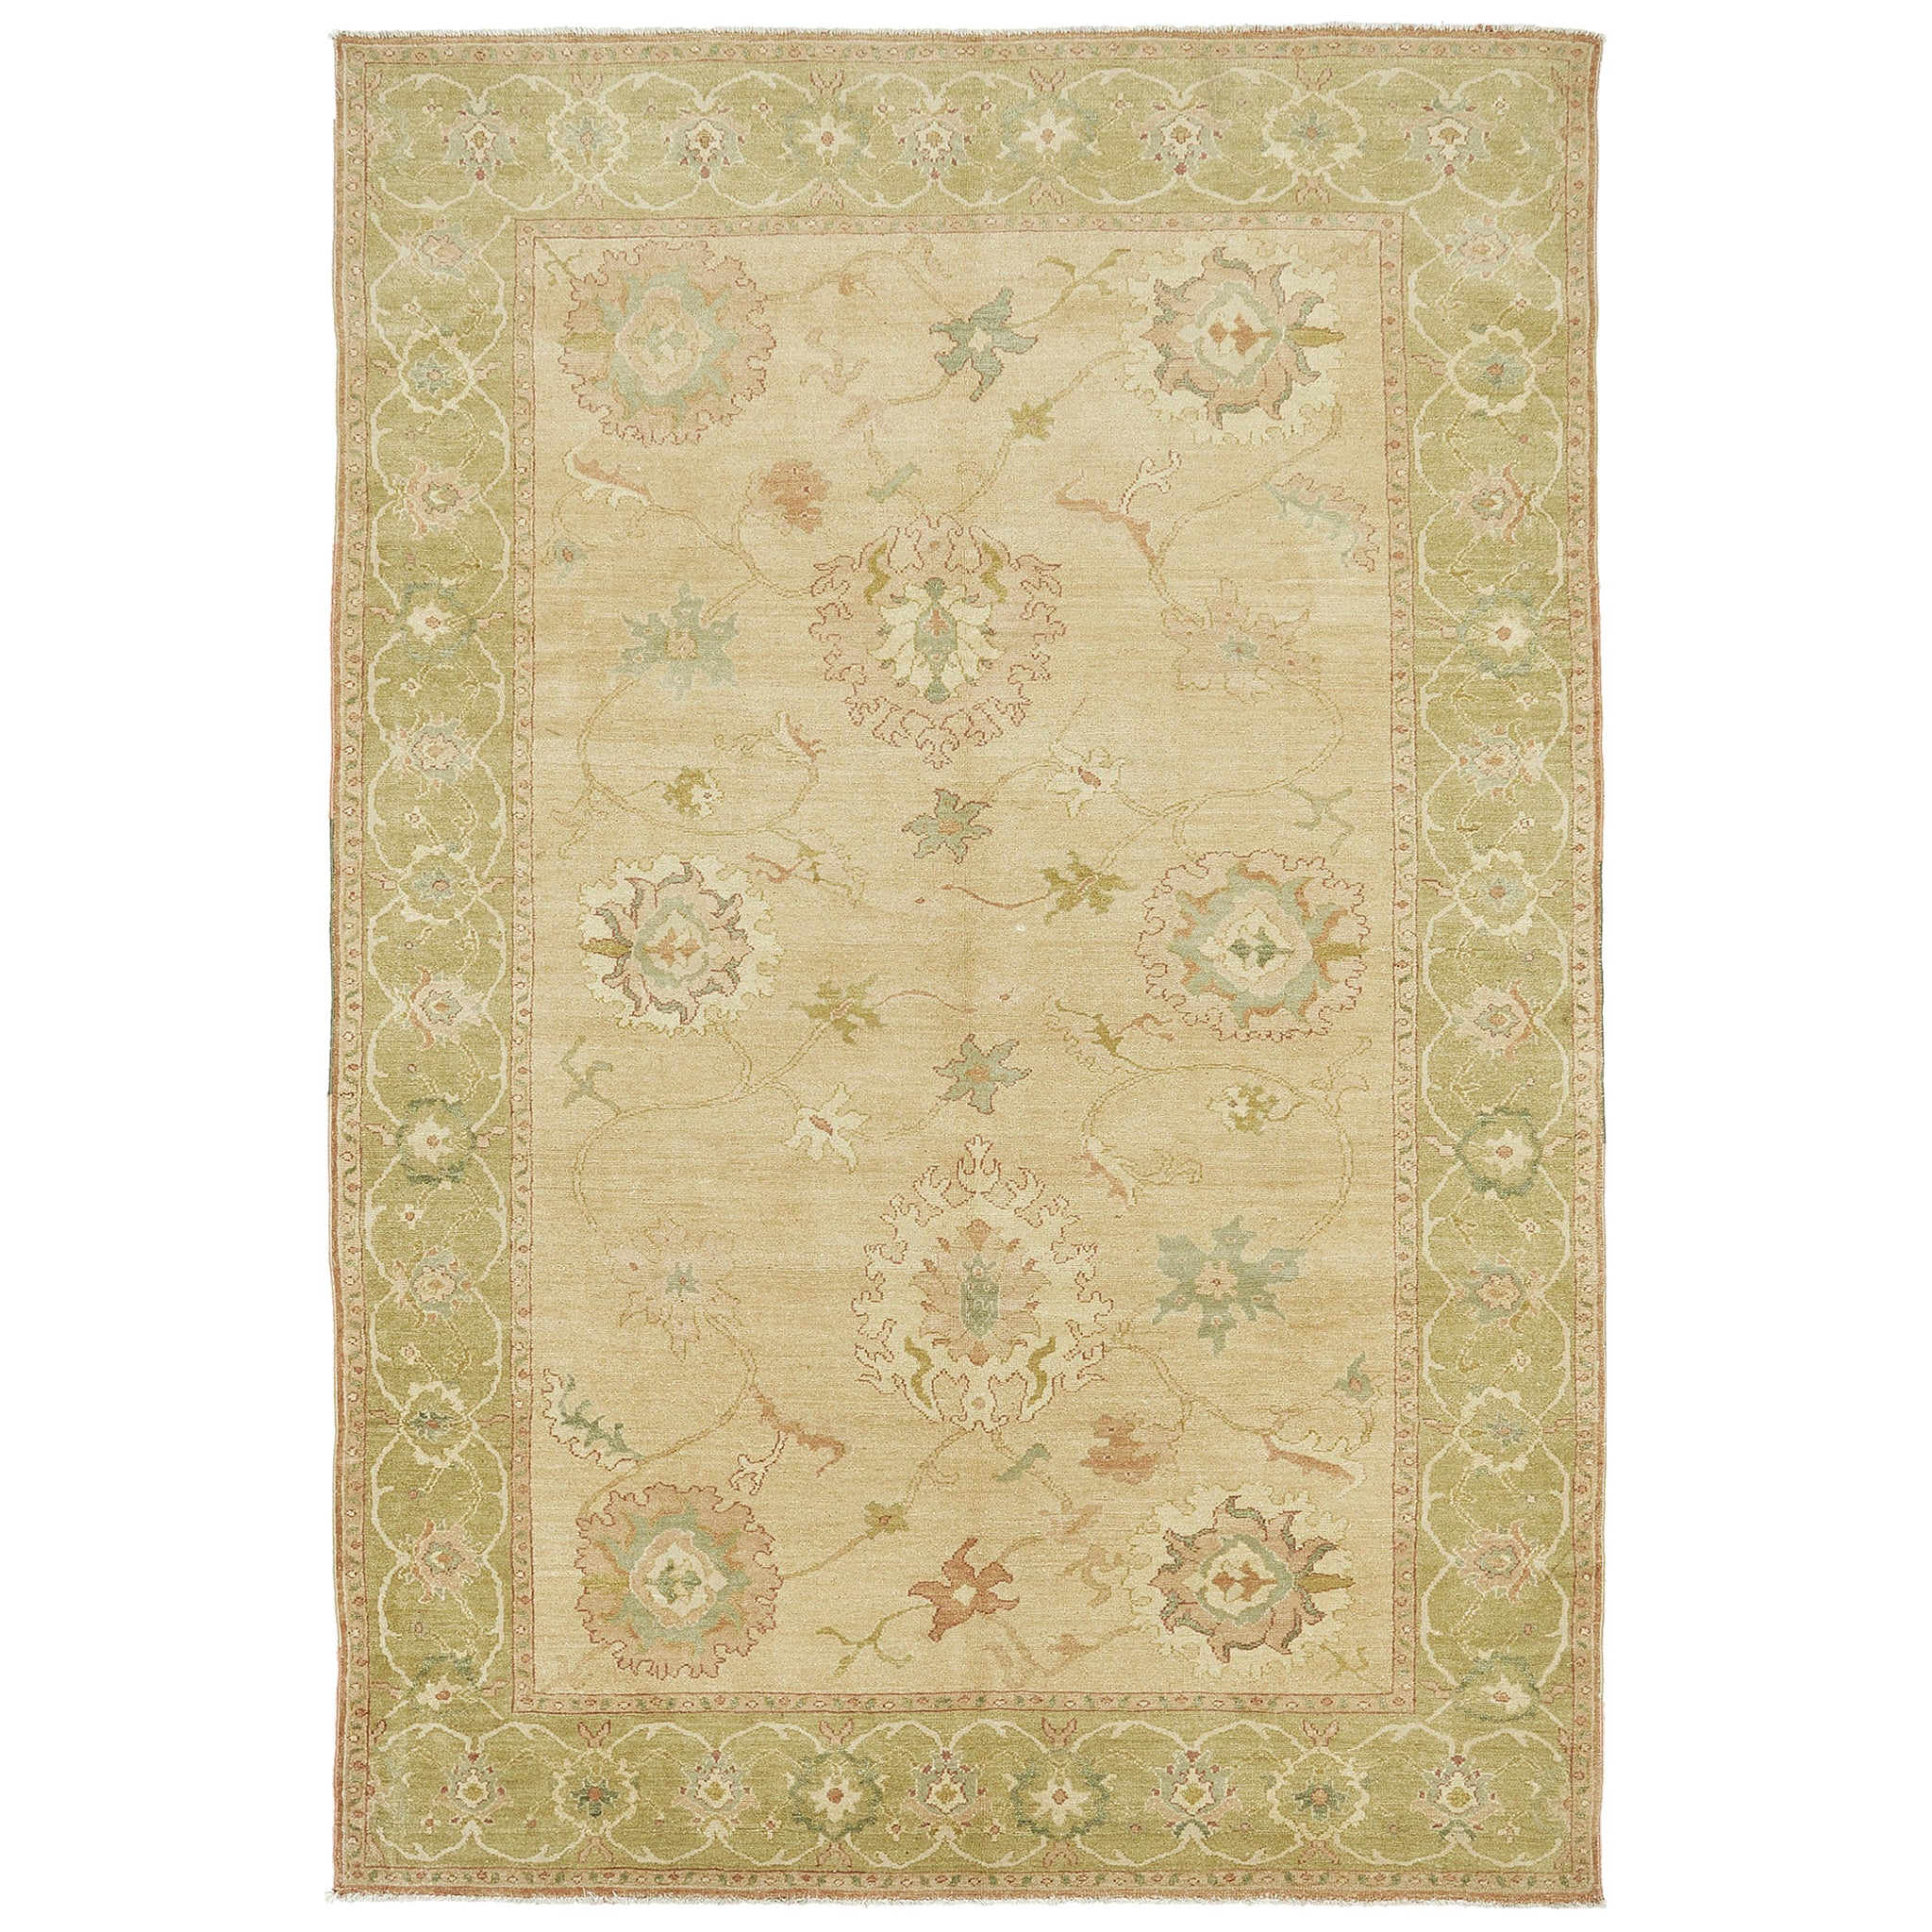 Egyptian Sultanabad Design Revival Rug For Sale